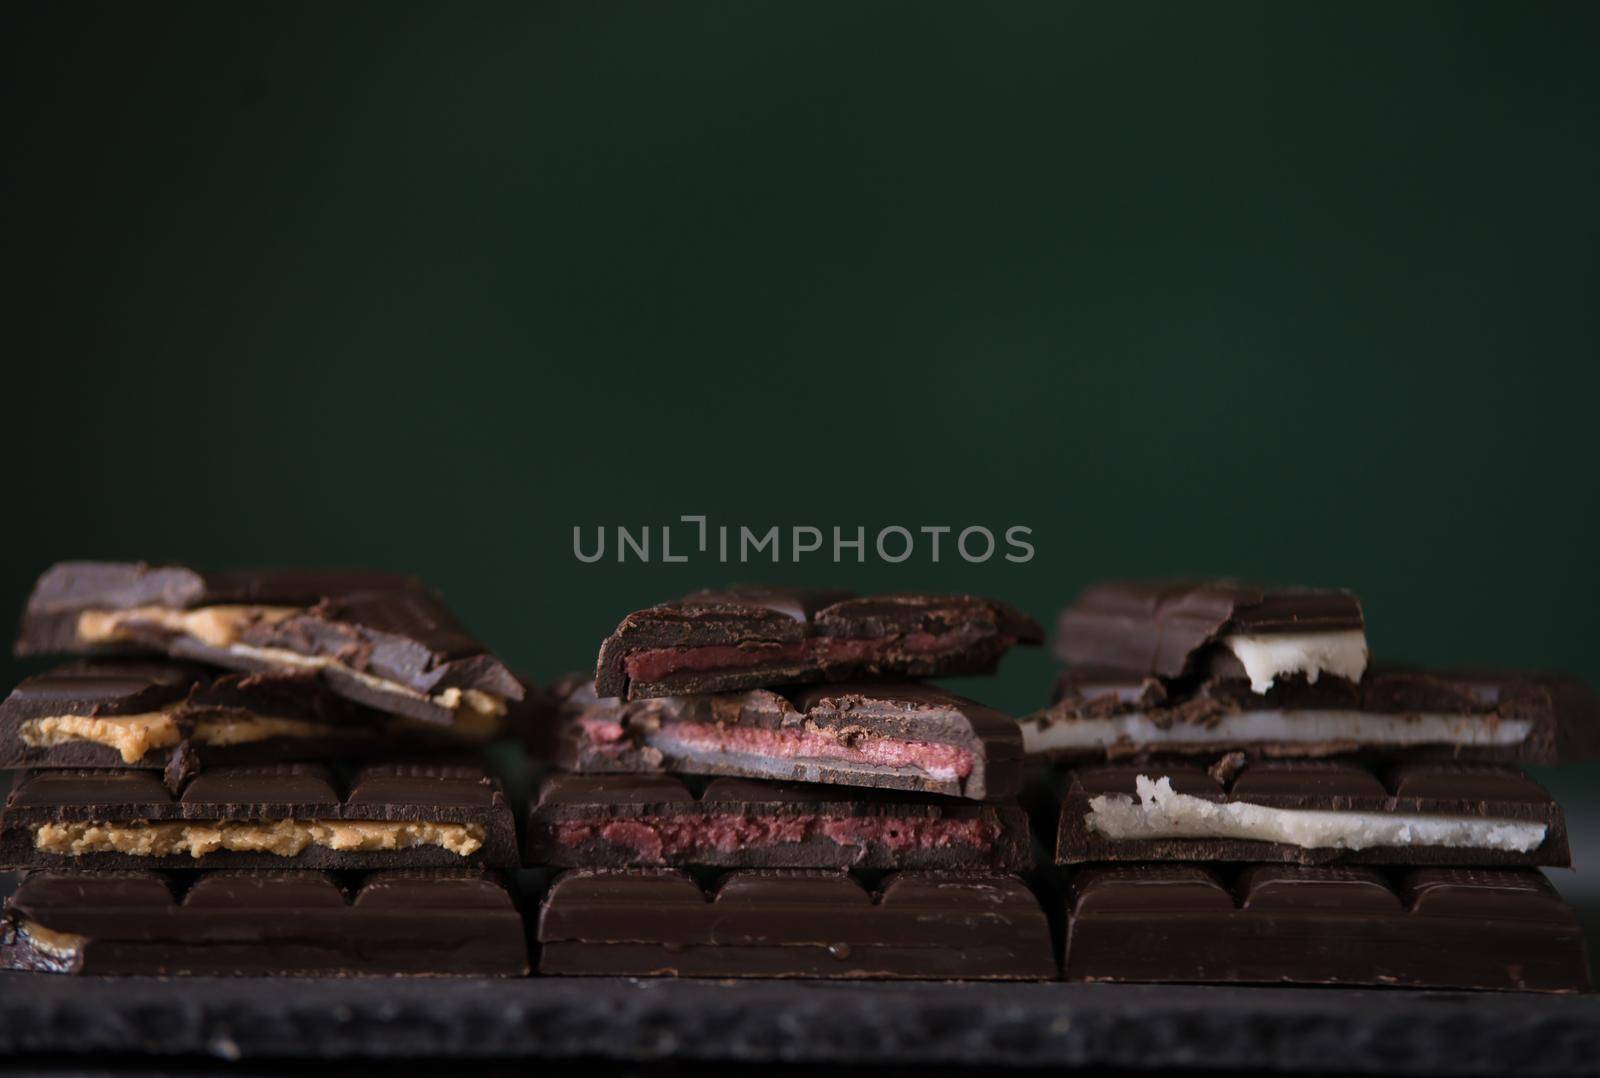 variety of homemade chocolate with different fillings by maramorosz